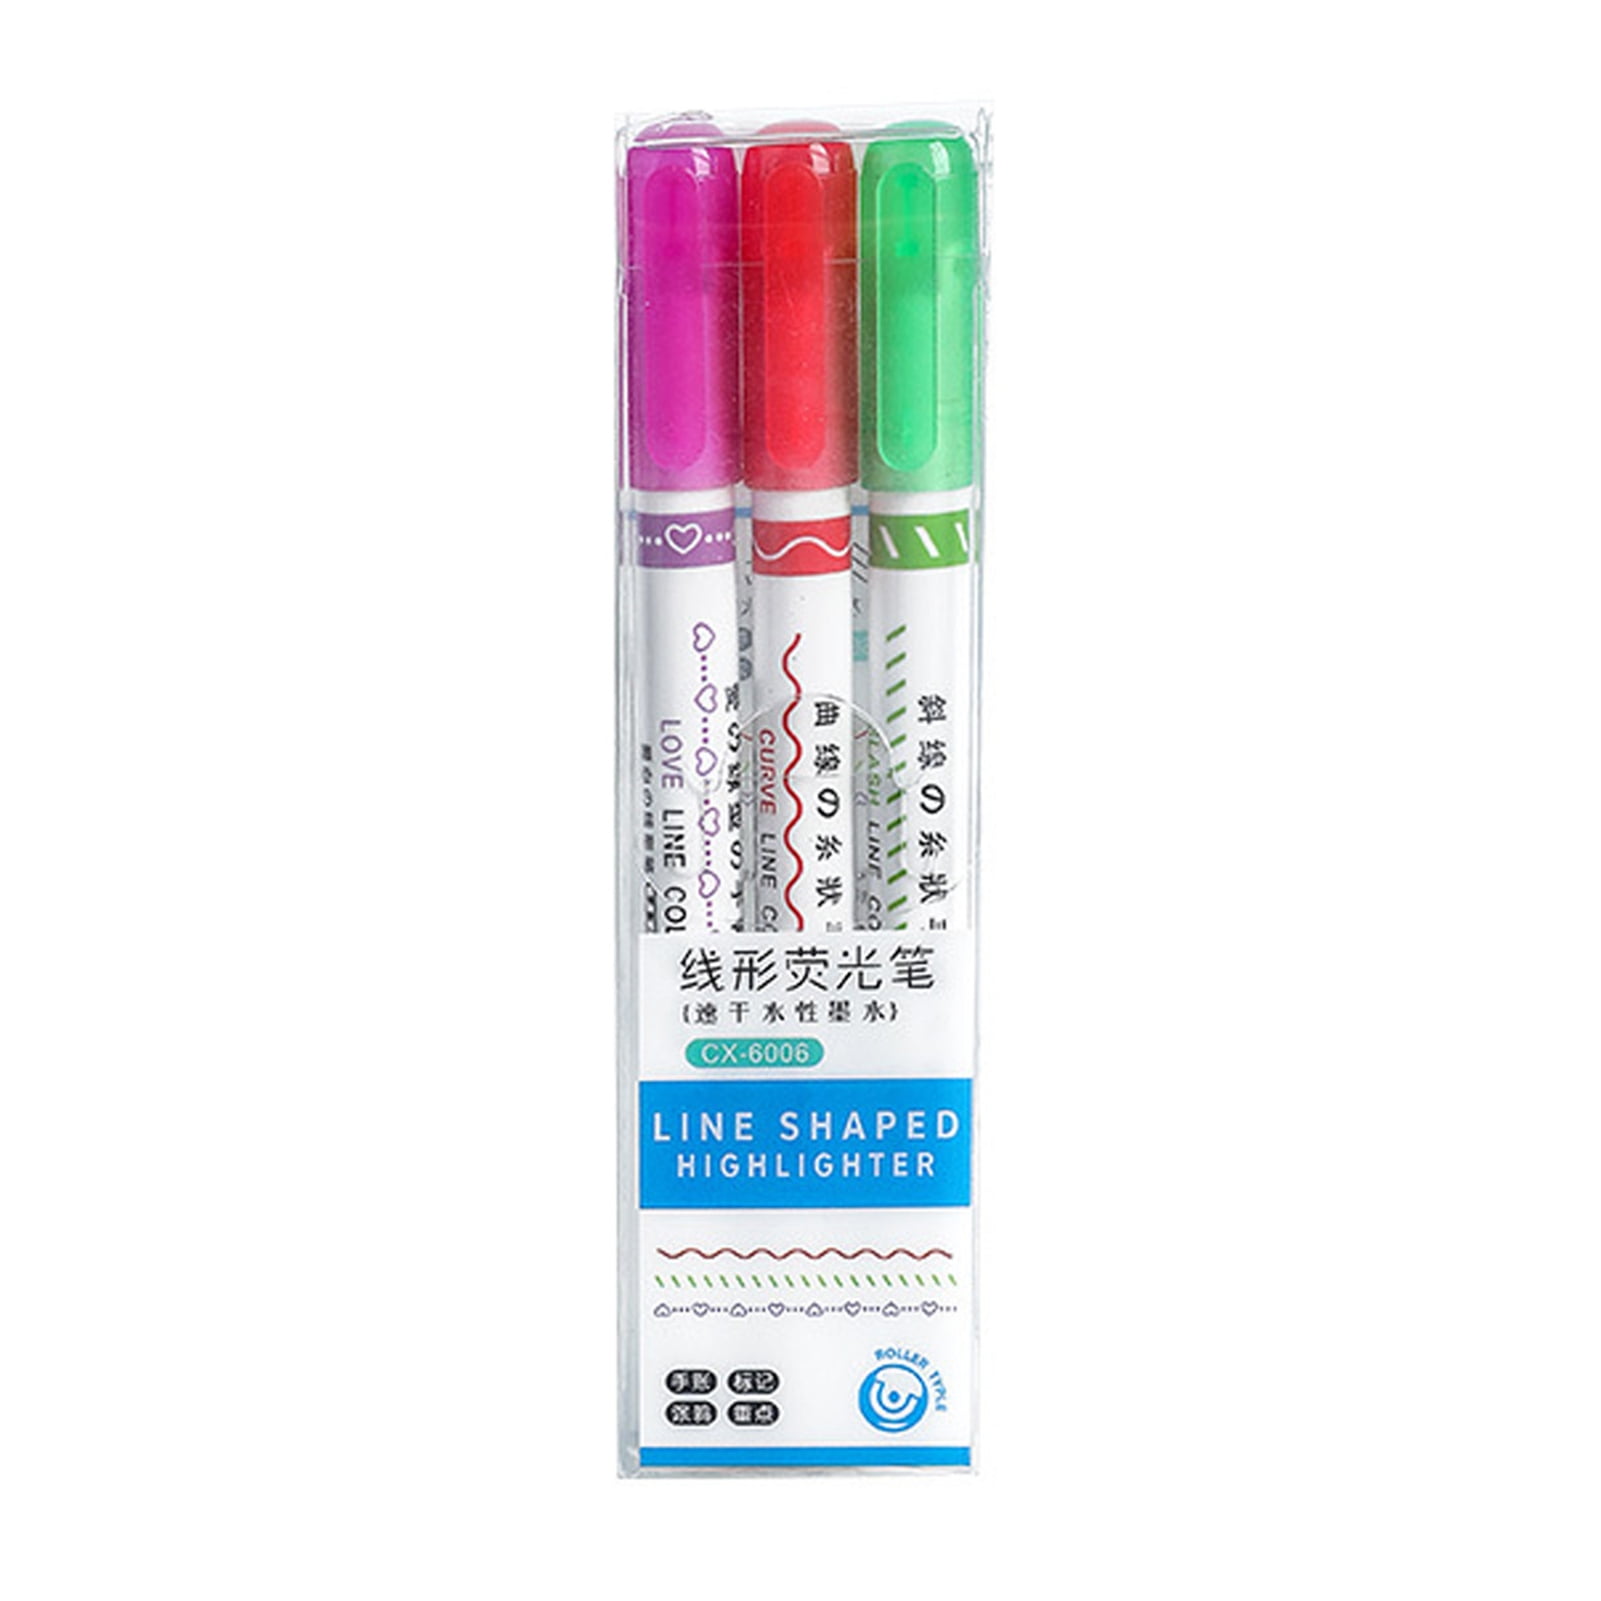 Highlighter Fancy Stationery Gift Construction Toys Kids Art Markers Color  Pens Building Block Toy - Explore China Wholesale Construction Toys Art  Markers Highlighter and Highlighter, Construction Toys, Art Markers